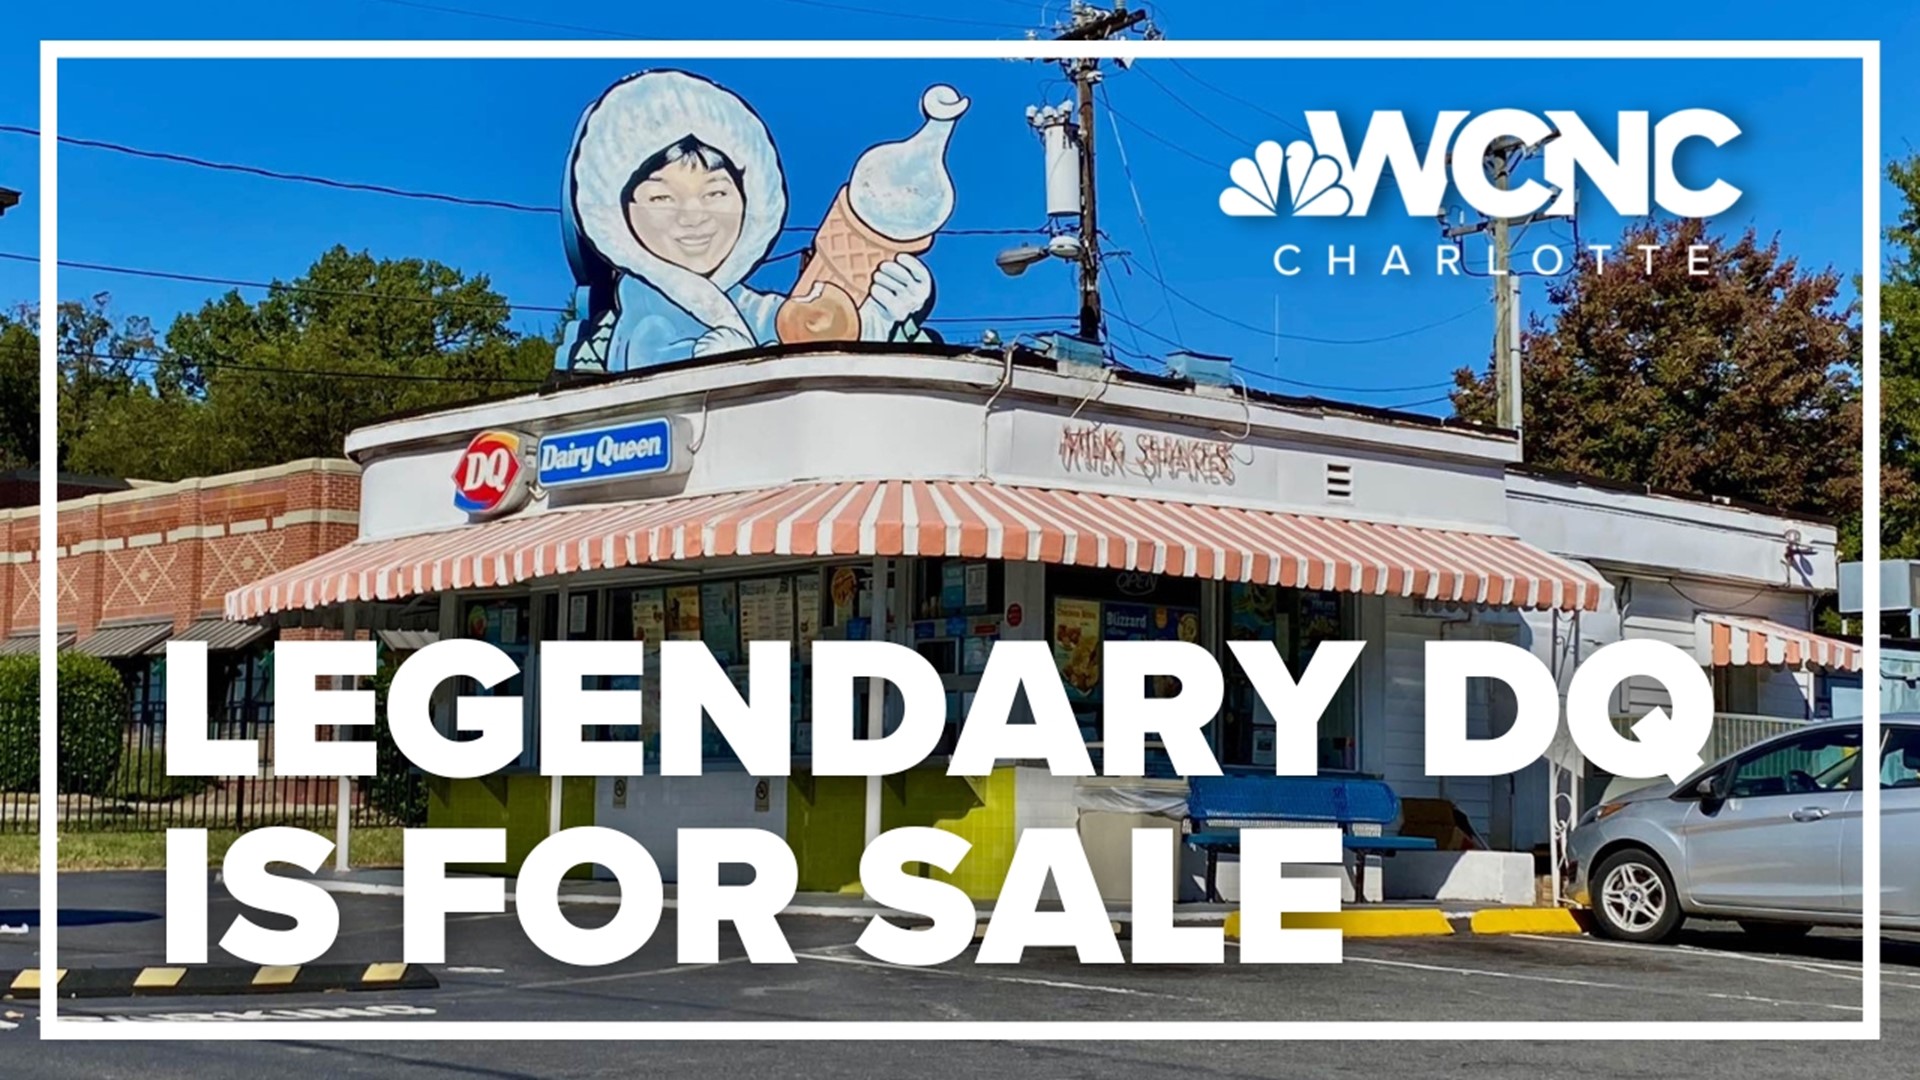 The historic Dairy Queen on Wilkinson Boulevard is listed for $1.4 million. The ad says the property is suitable for fast food and other retail uses.